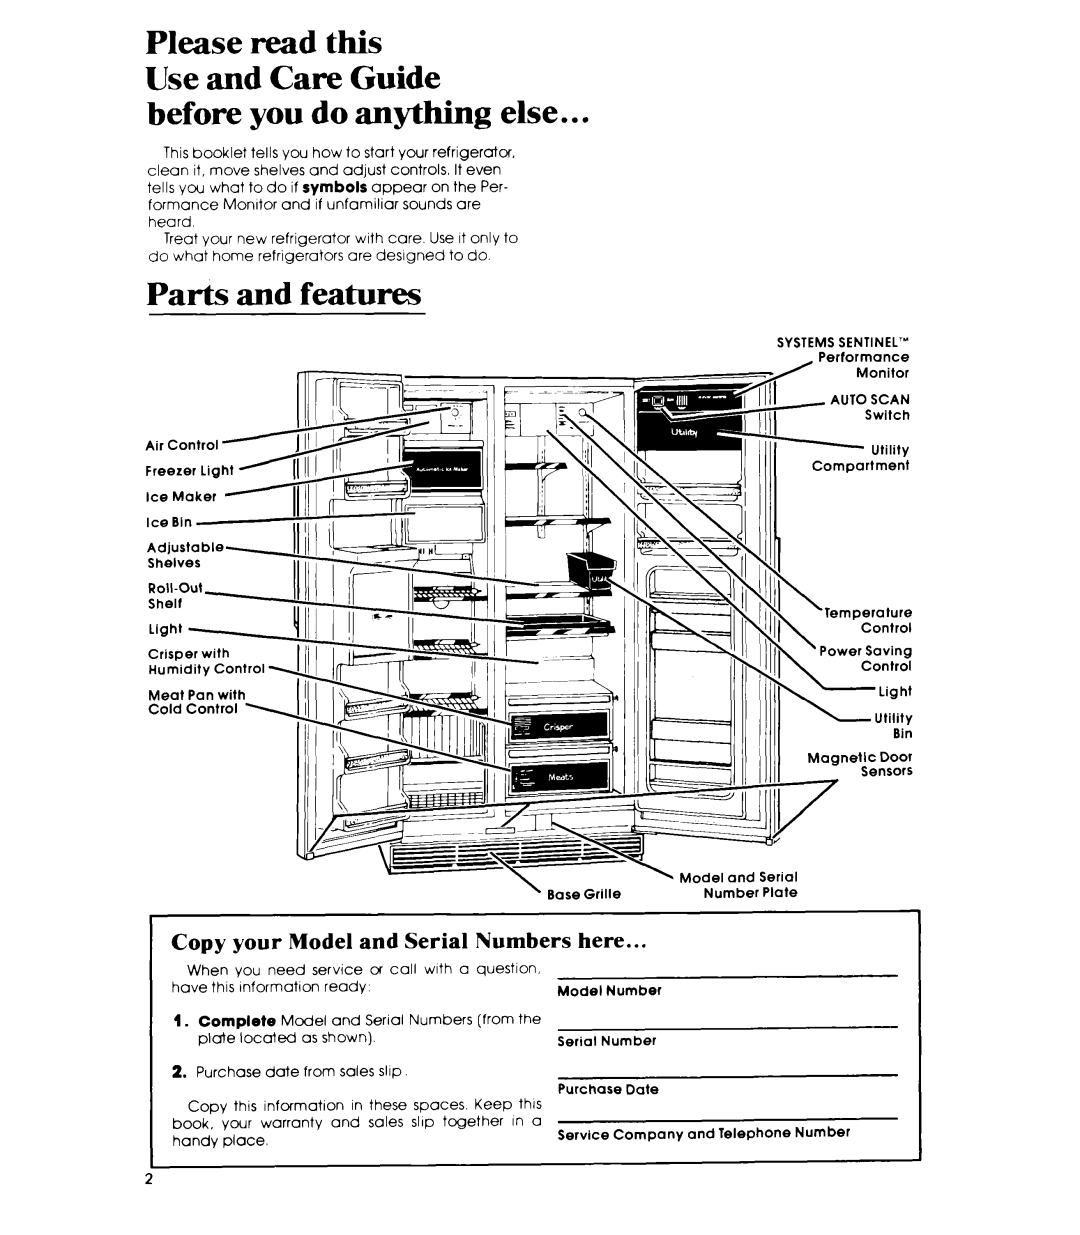 Whirlpool ED26SS manual before you do anything else, Parts and features, Please read this Use and Care Guide, 4II zr!/r’ 